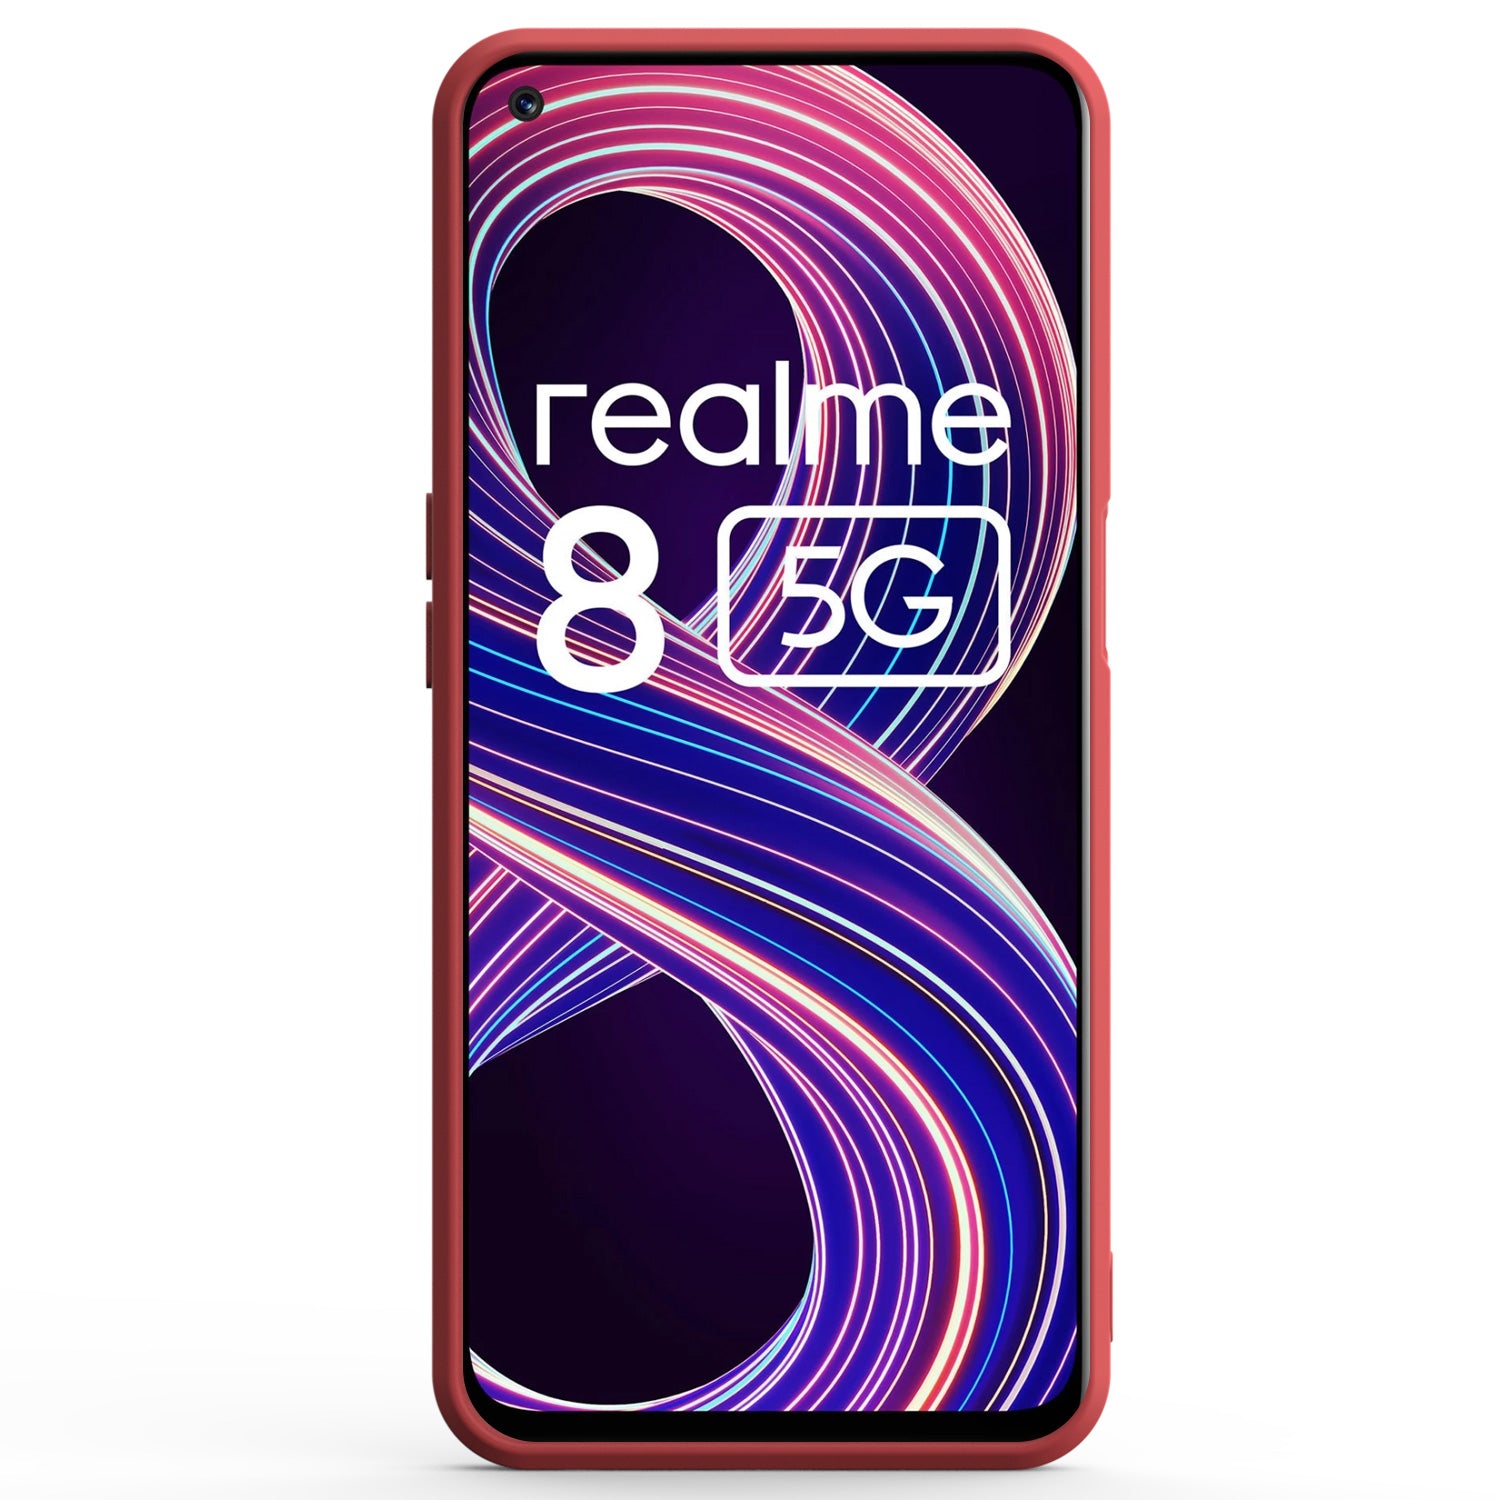 shockproof back cover for realme 8 5g for realme 8 5g , silicon cases and covers for realme 8 5g